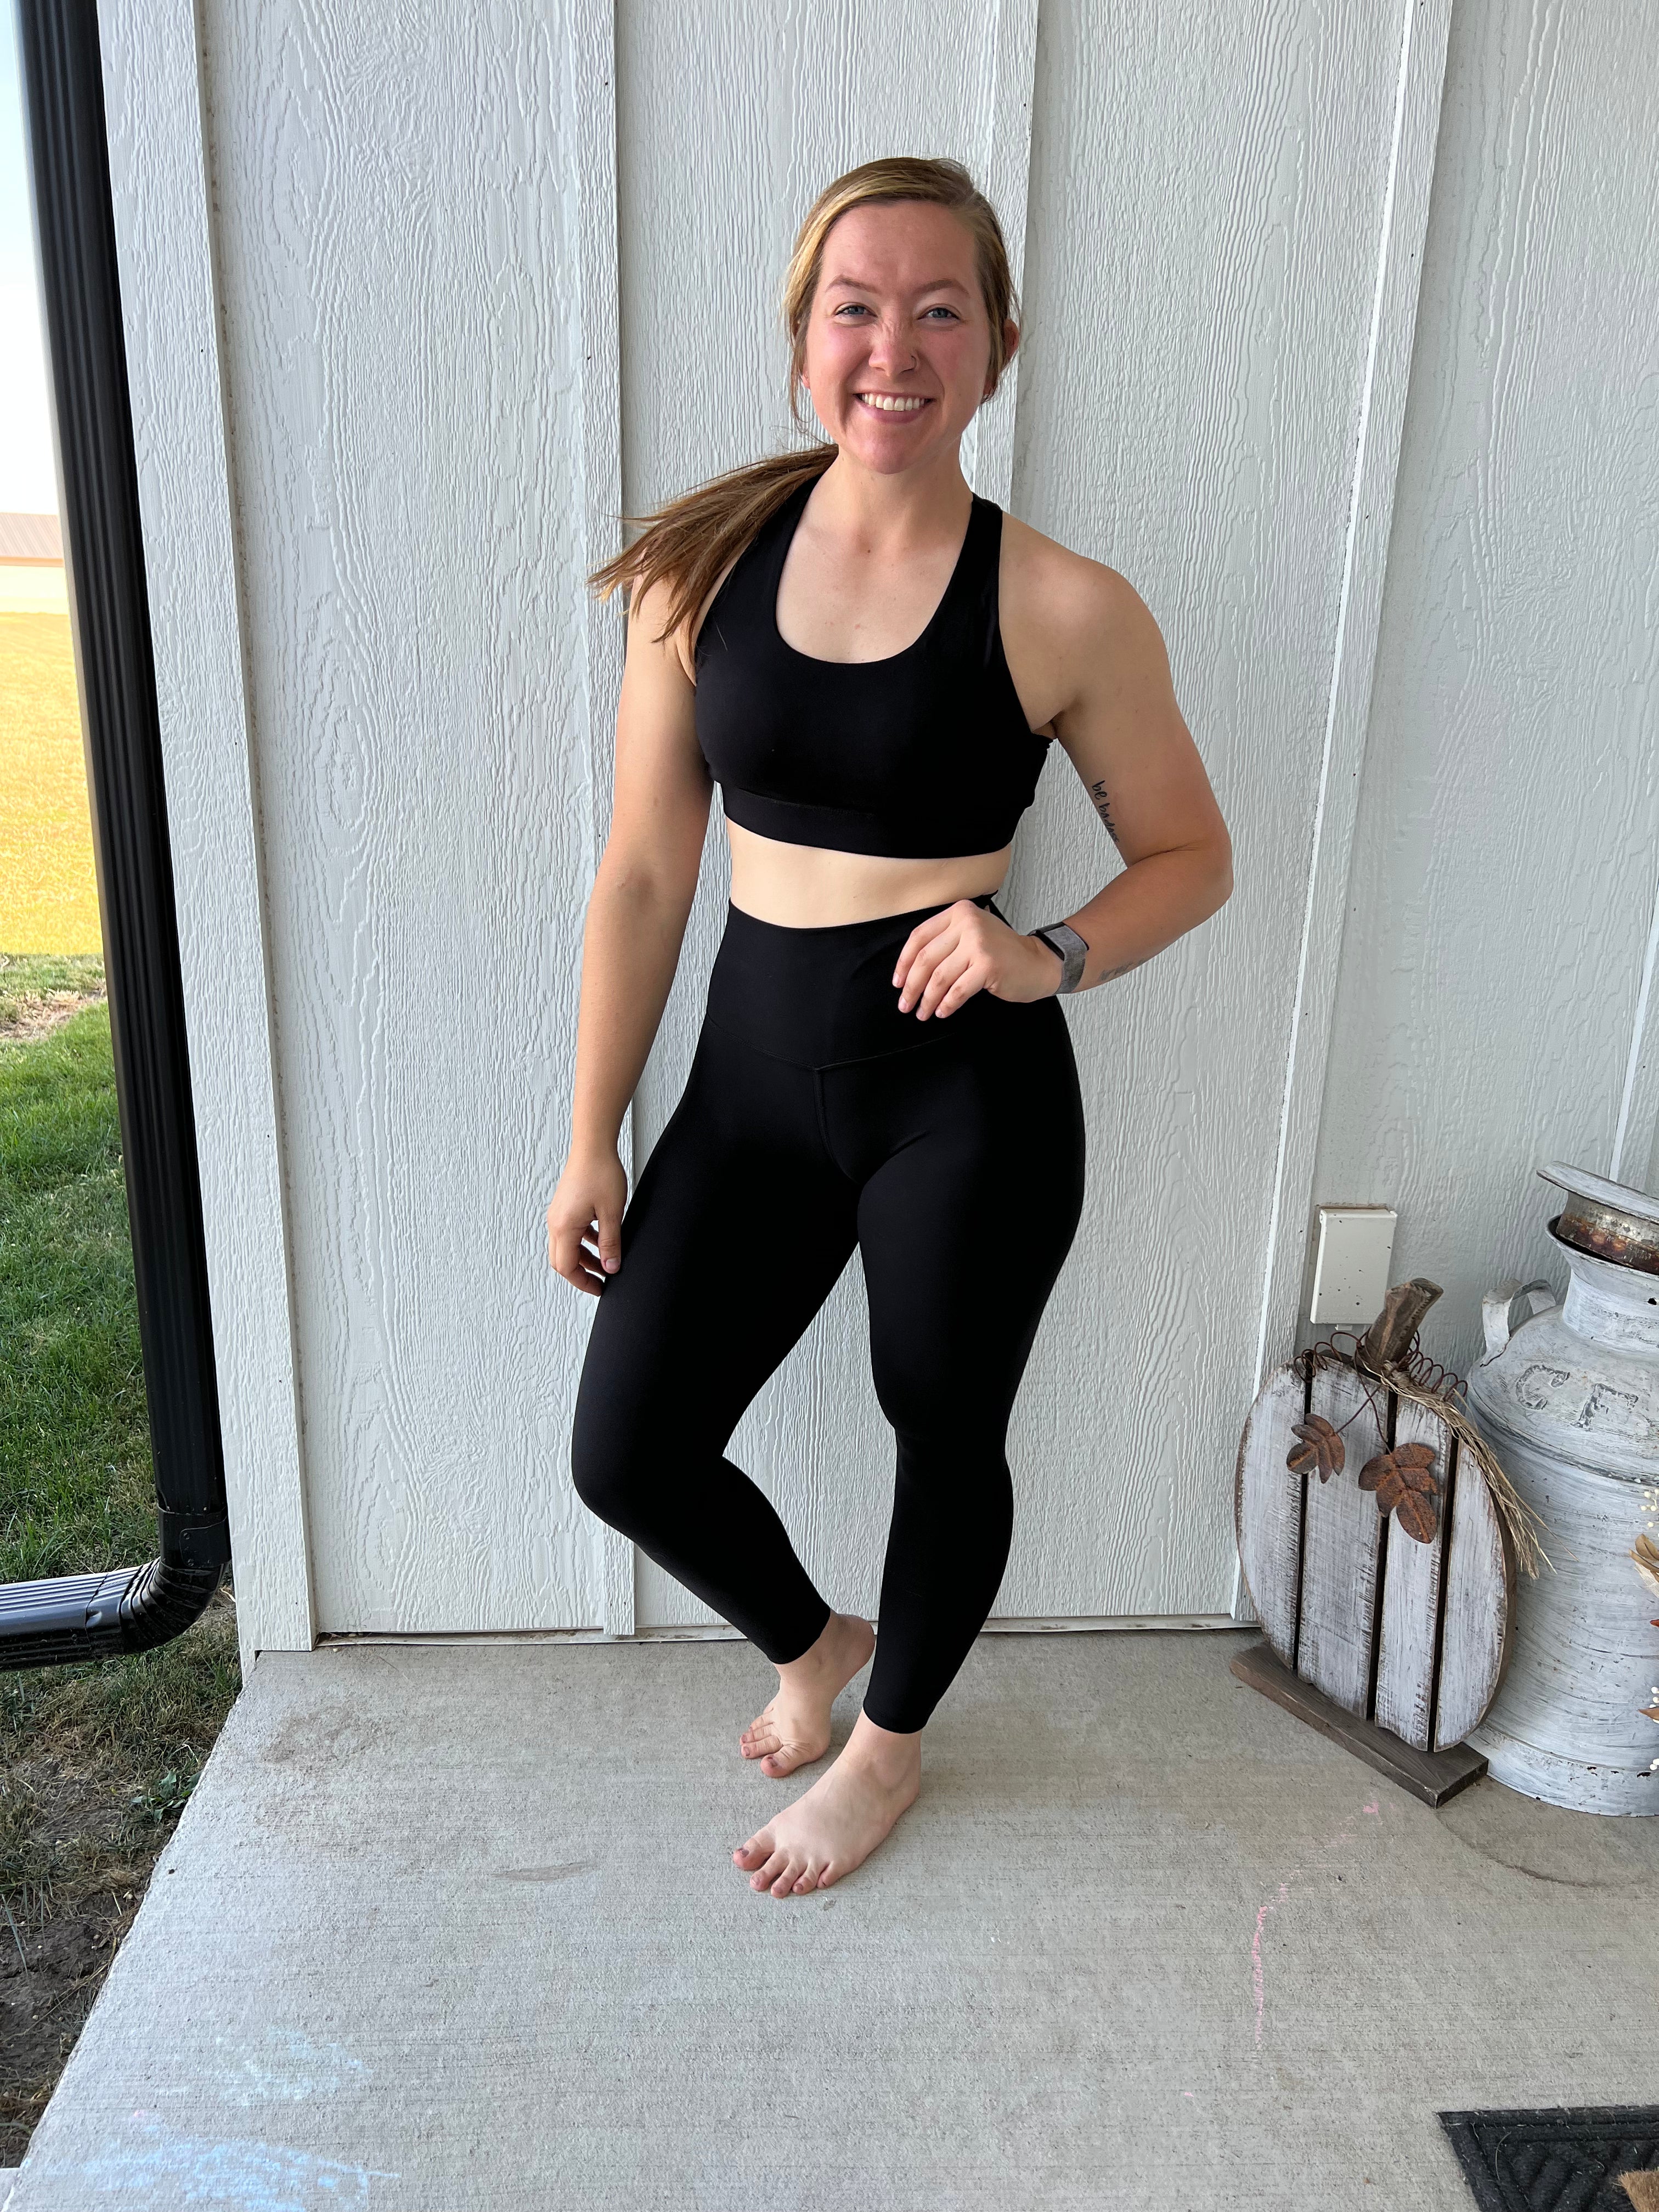 THE BUTTERY SOFT SE Leggings (L, 2XL + 3XL) – Simply Empowered Co